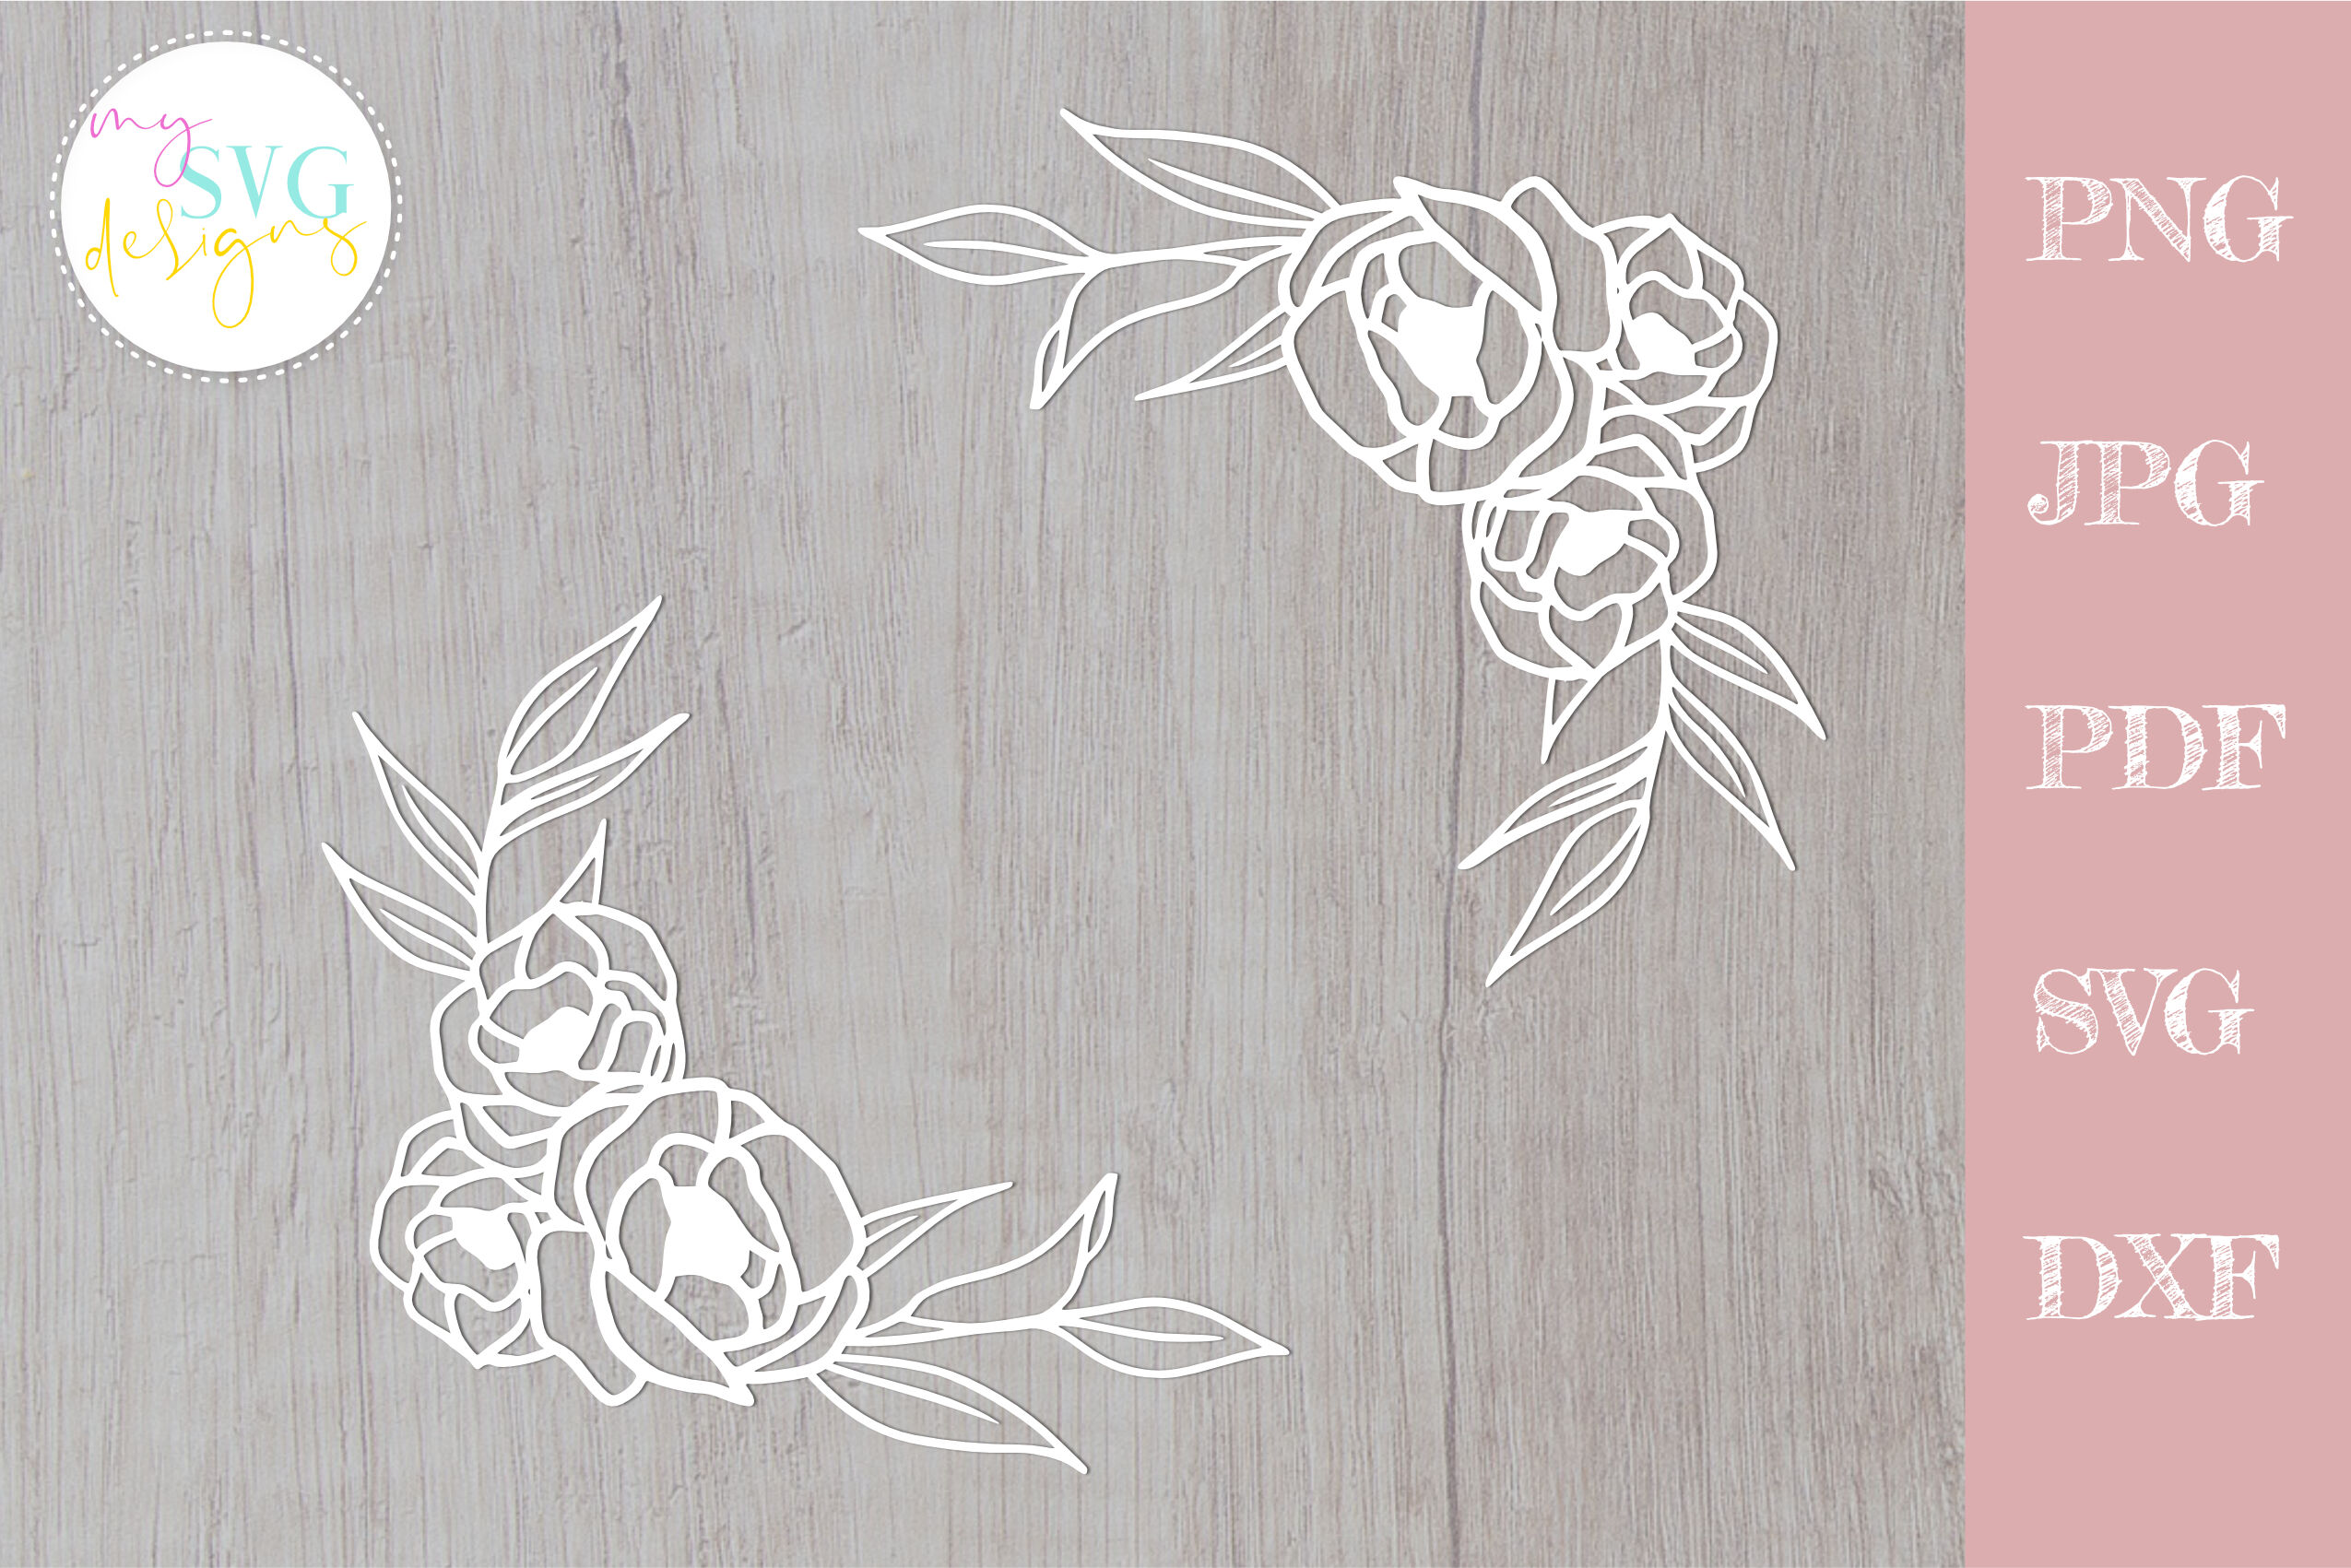 FREE SVG - Free roses SVG. Free roses frame. SVG, EPS & DXF files